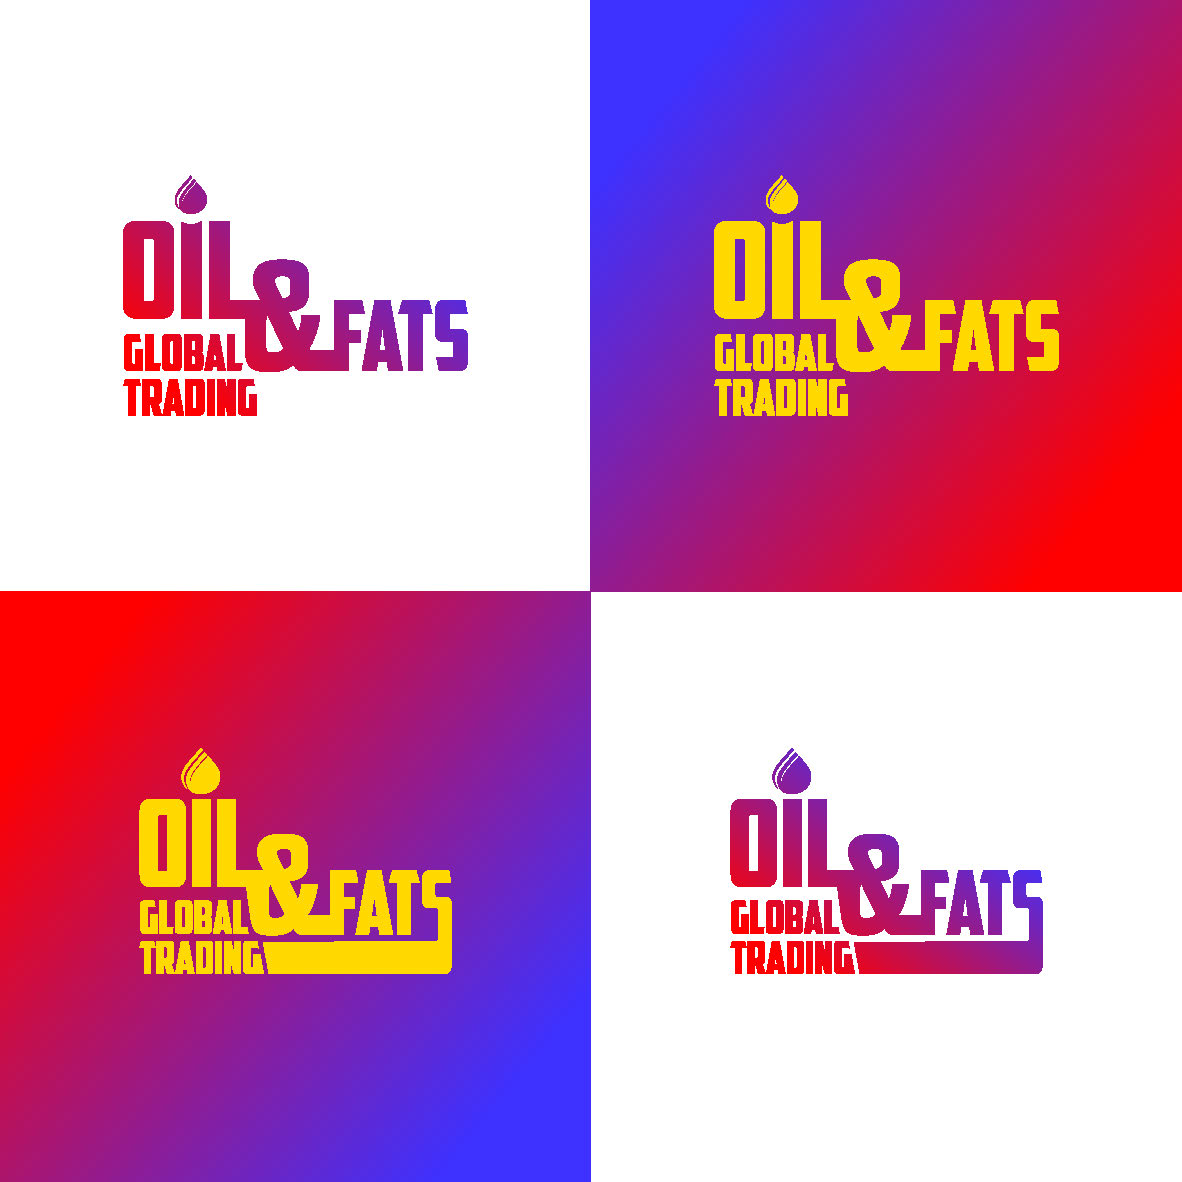 OILFATS LOGO Page 12